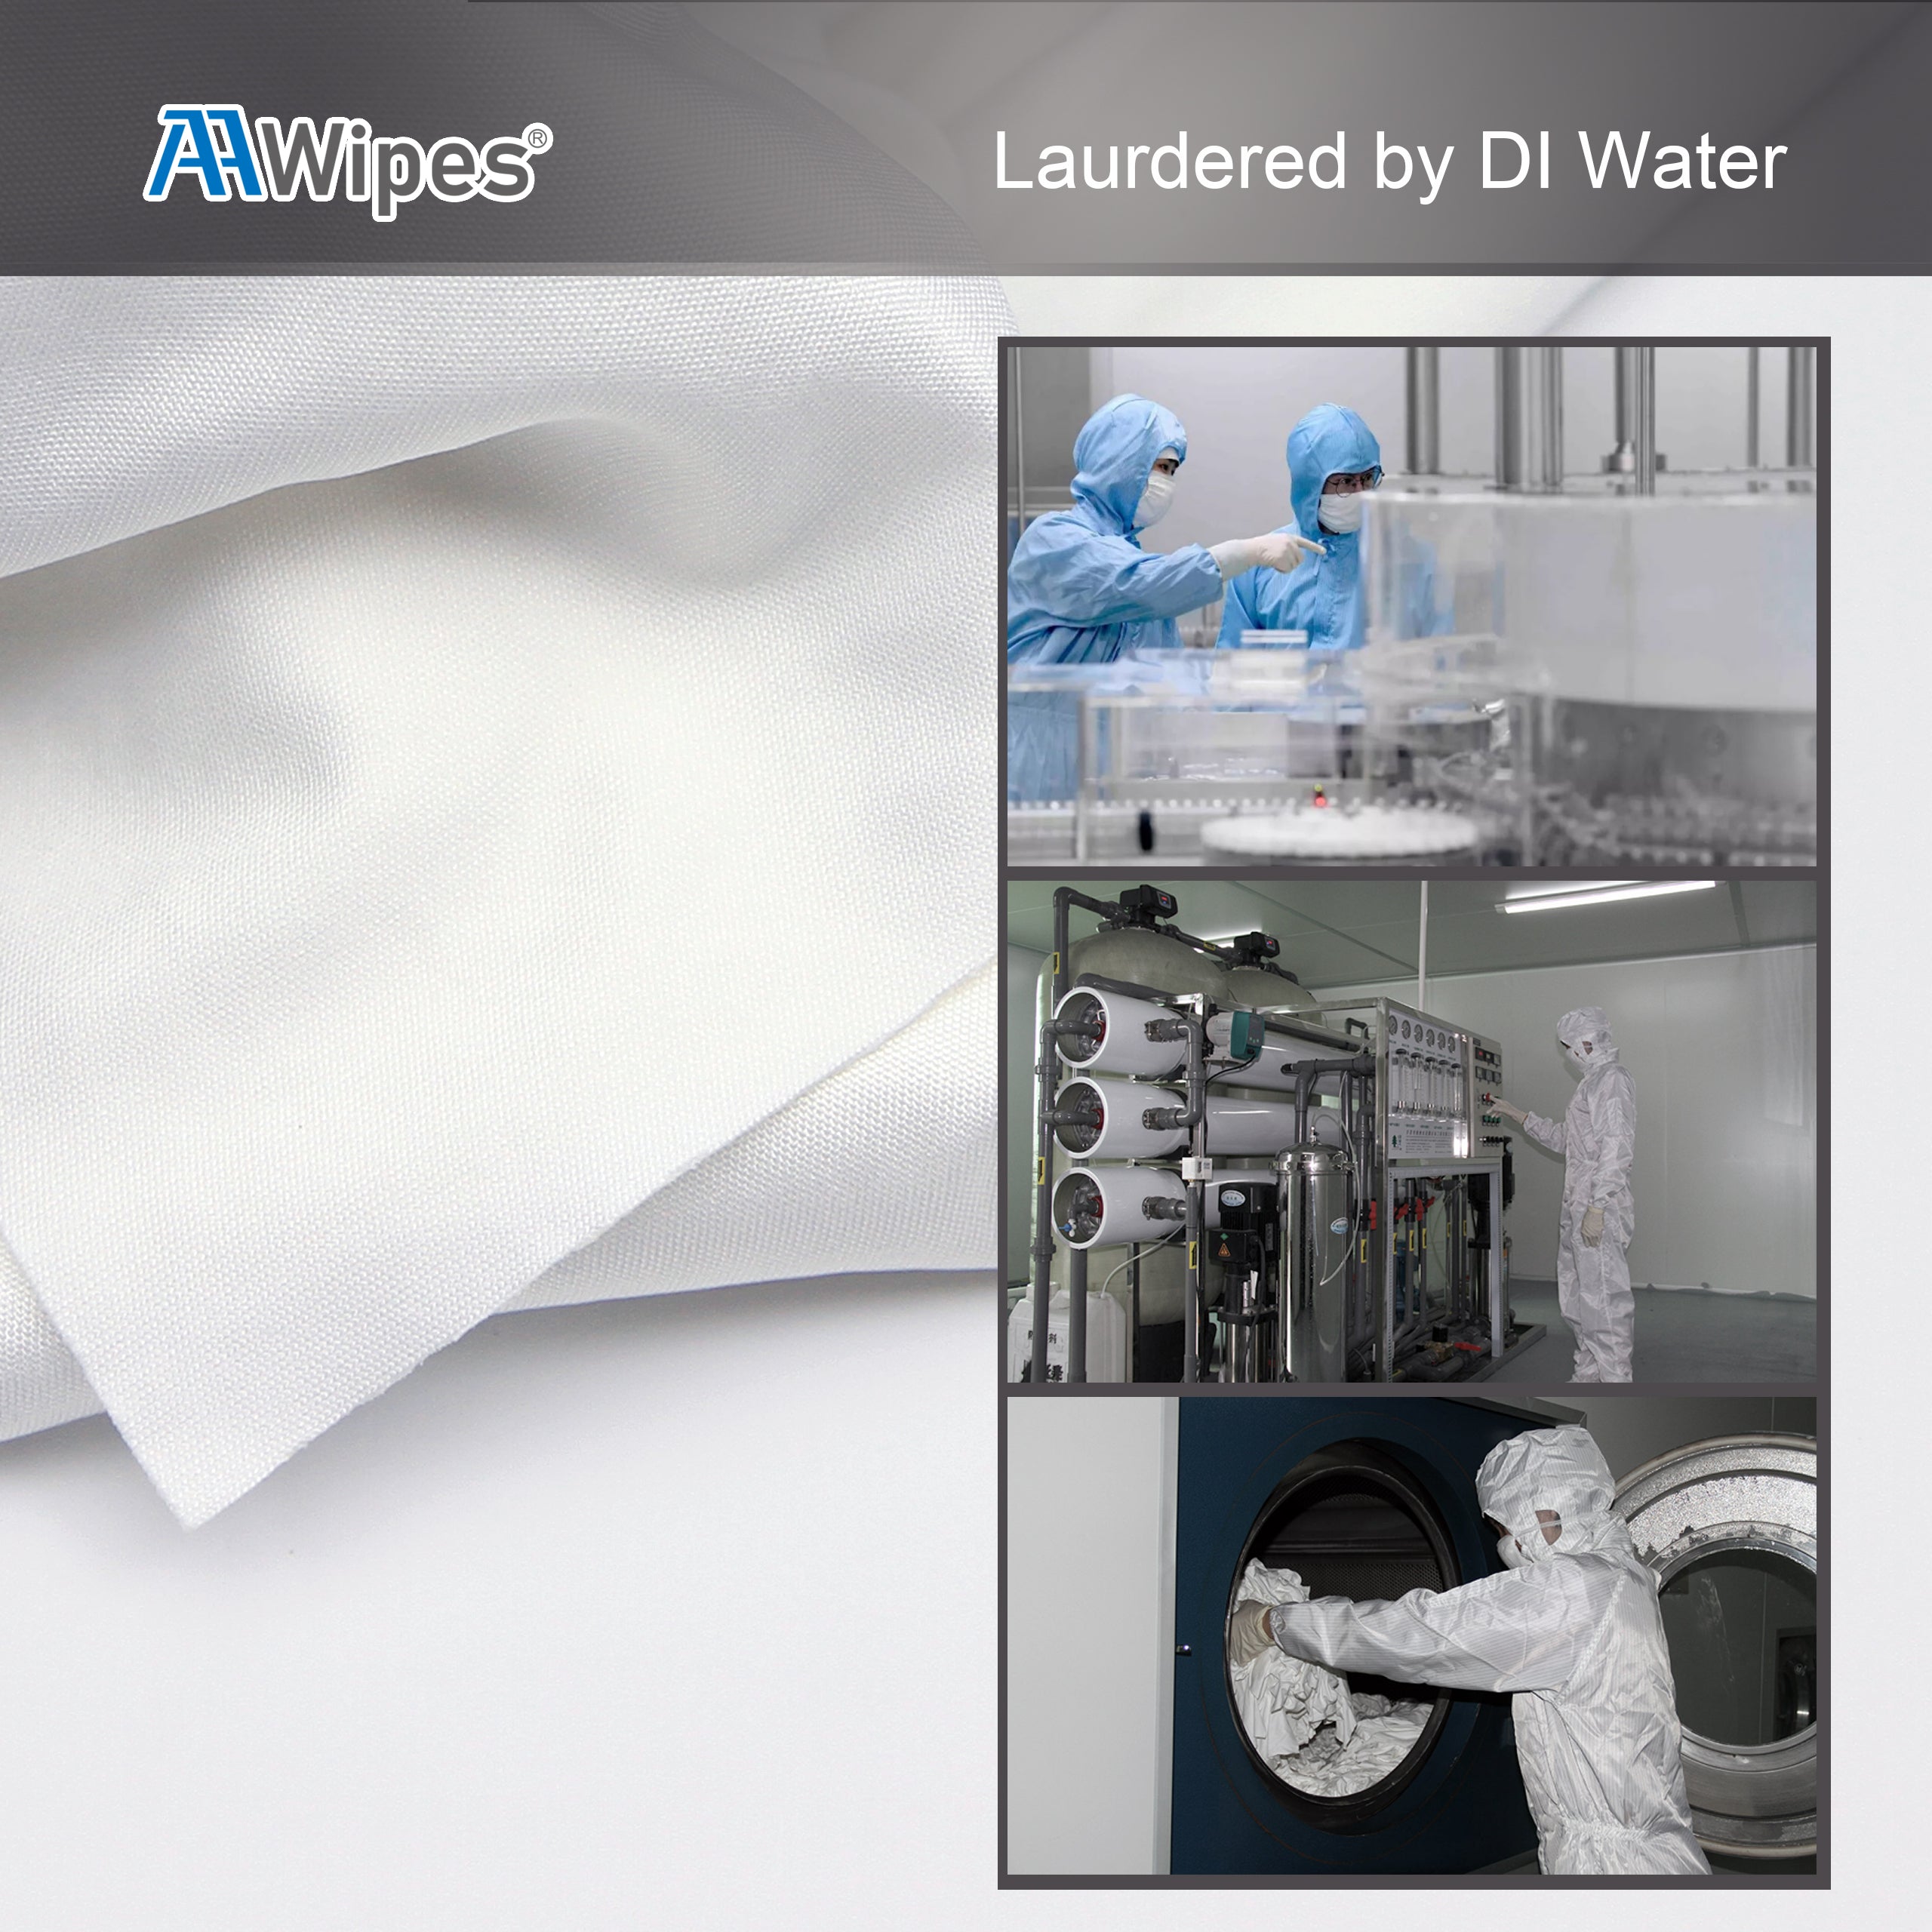 AAwipes sanitory supplier  provide customized production for different wipes with unlimited choice in size, cleanliness level, packaging options, and dispensing options to suit your cleanroom supplies needs